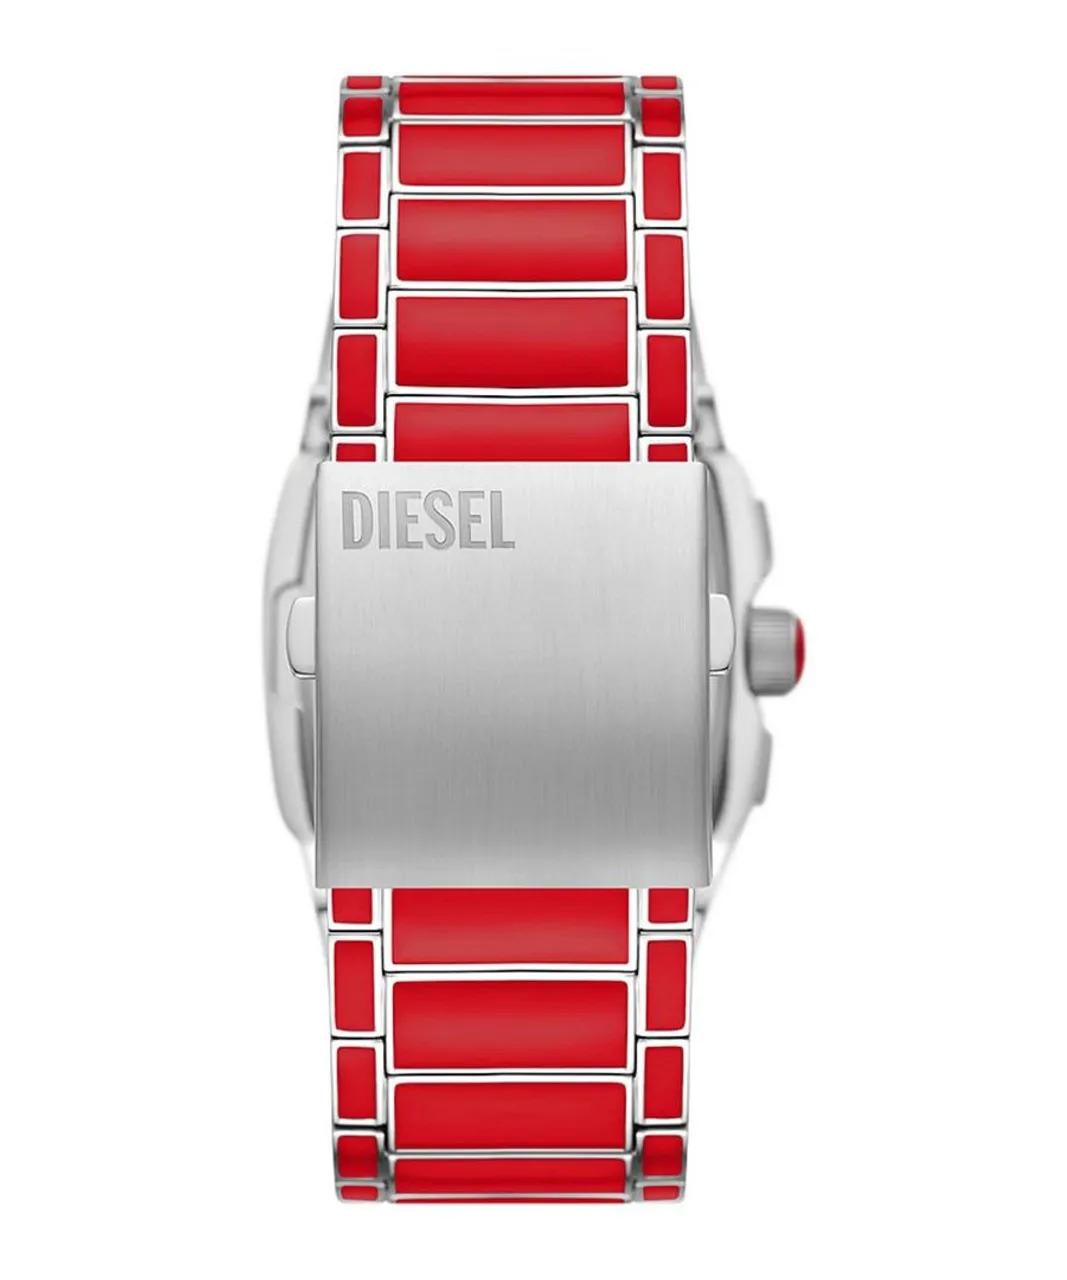 Diesel Cliffhanger Mens Red Watch DZ4637 Stainless Steel (archived) - One Size